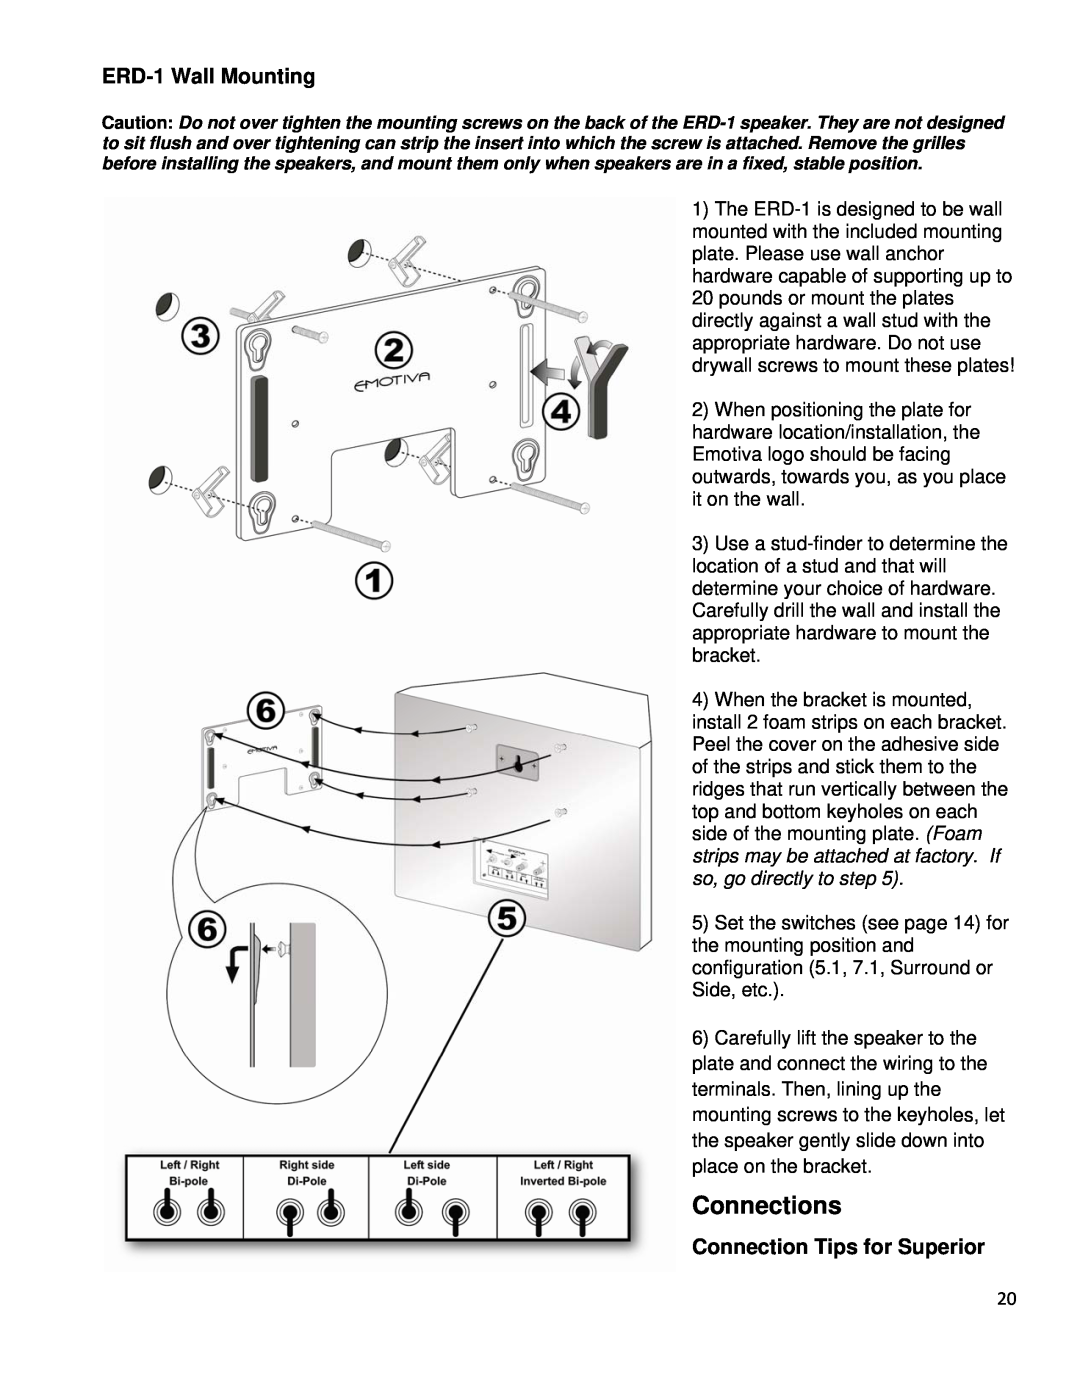 Emotiva ERM-6.3, ERM-1, ERM-6.2, ERT-8.3 manual ERD-1Wall Mounting, Connection Tips for Superior, Connections 